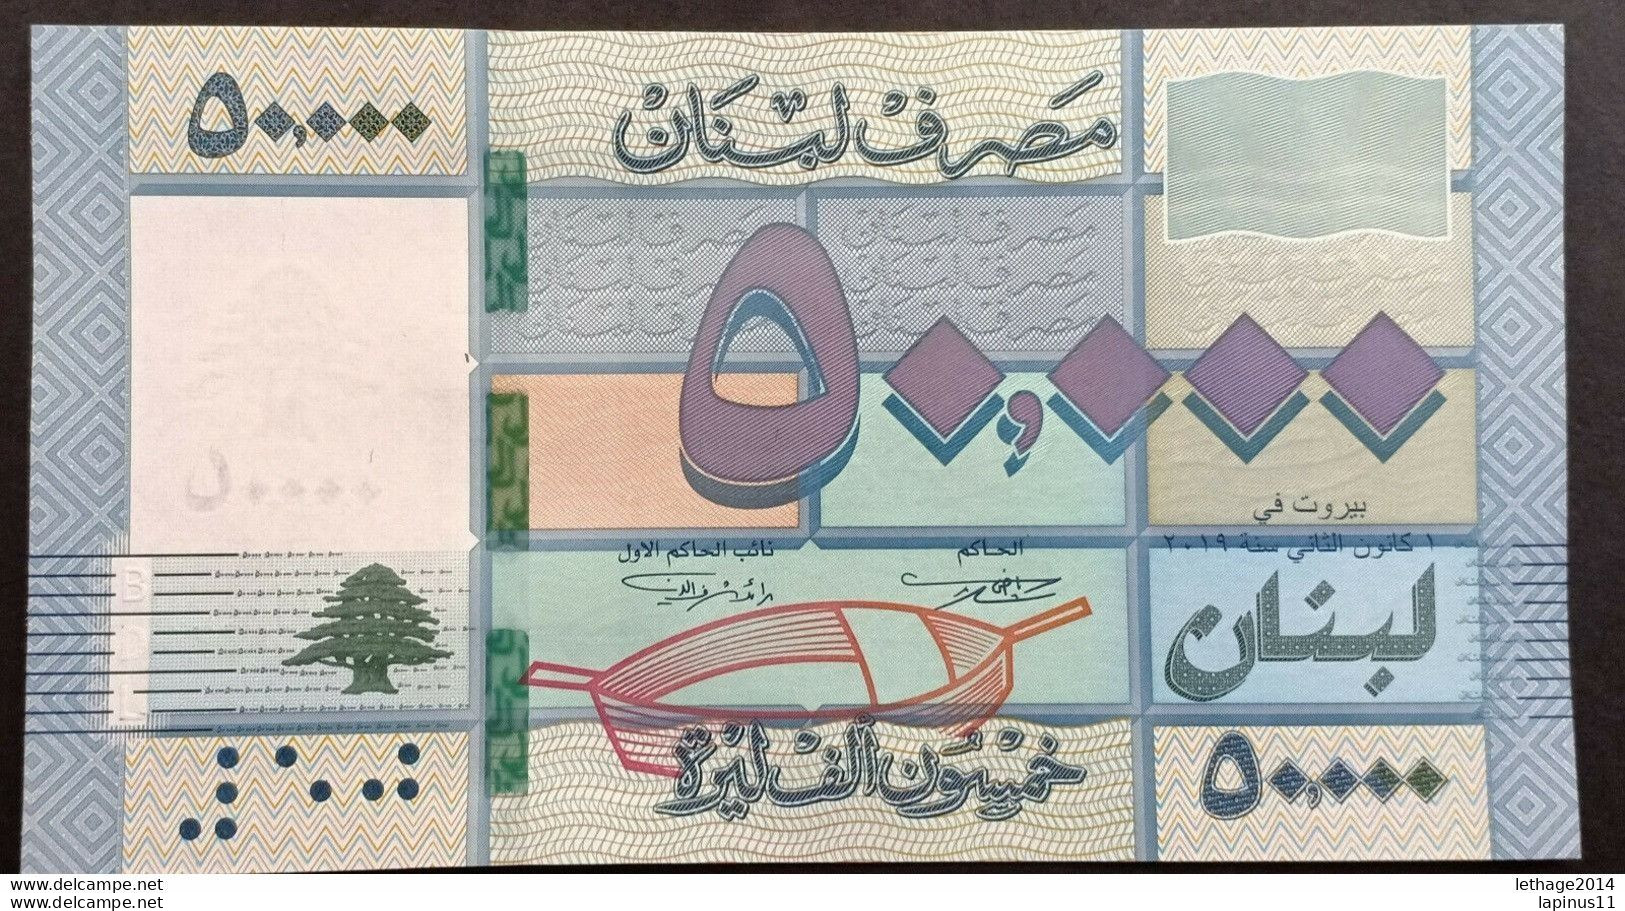 Just Issued, Lebanon 50000 Livres 2019 UNC New EARLY RELEASE Banknote Prefix D0 - Giordania